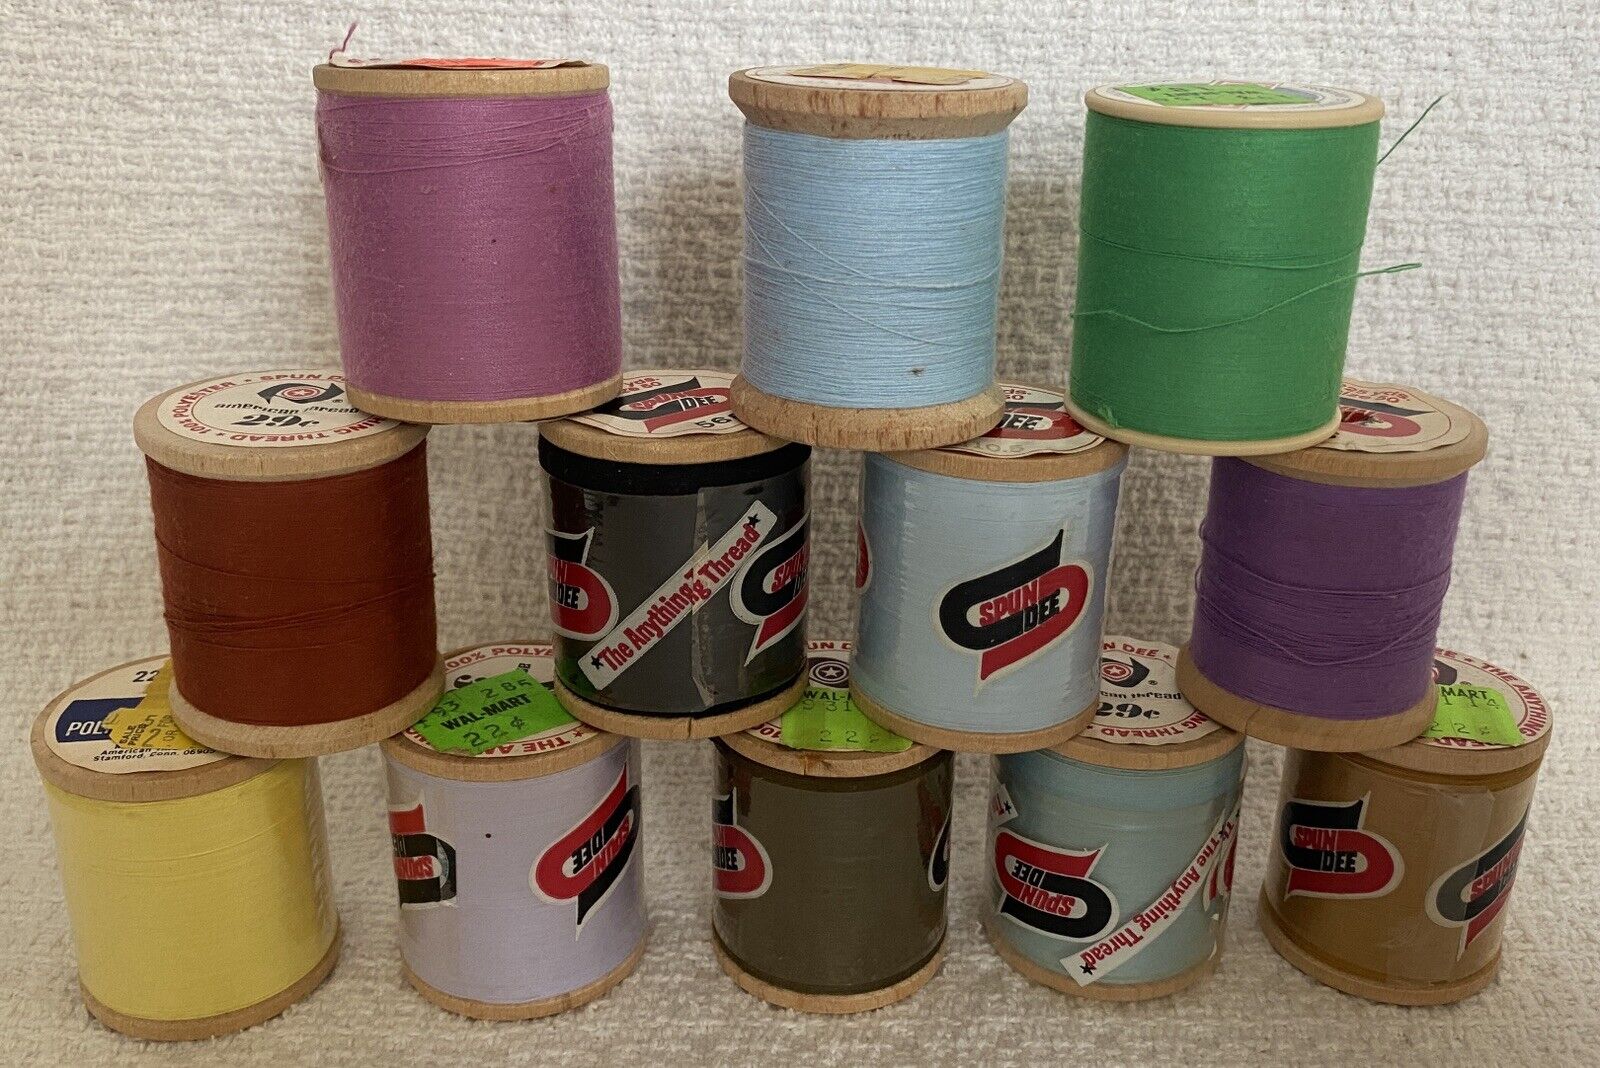 Lot Of 12 Vintage Wooden Thread Spools including 10 Spun Dee Variety Of Colors